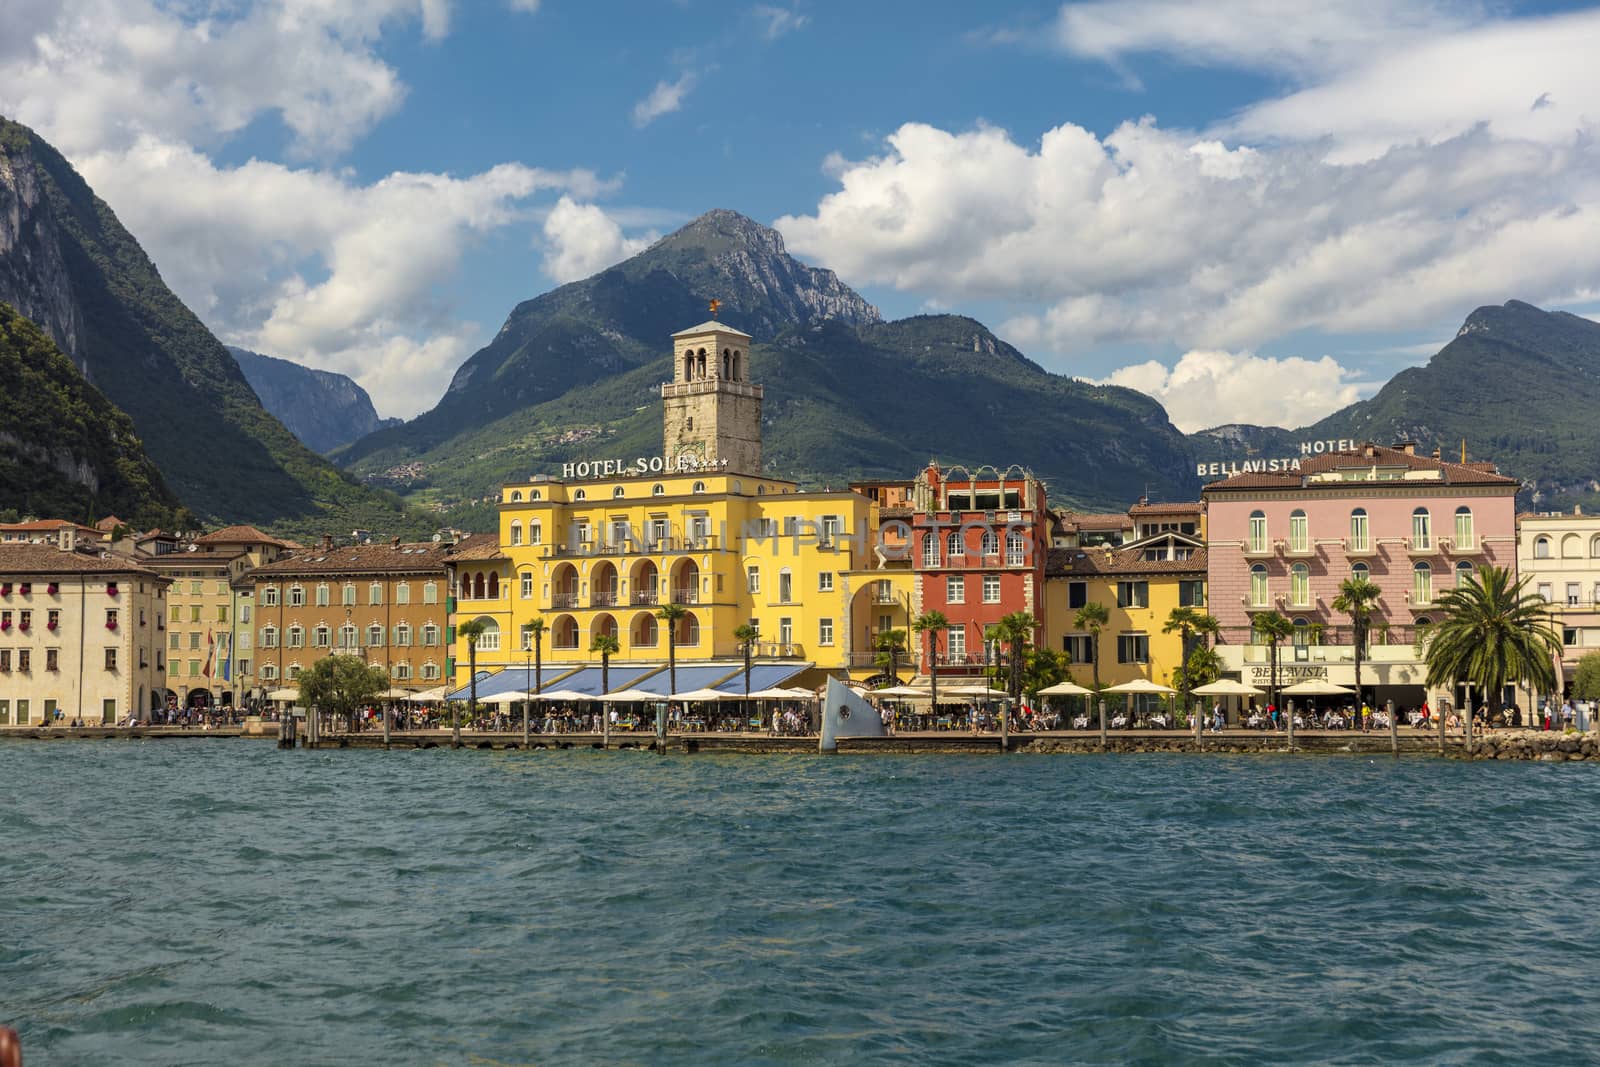 Riva del Garda, Lake Garda, Italy, August 2019, view of the lake by ElectricEggPhoto